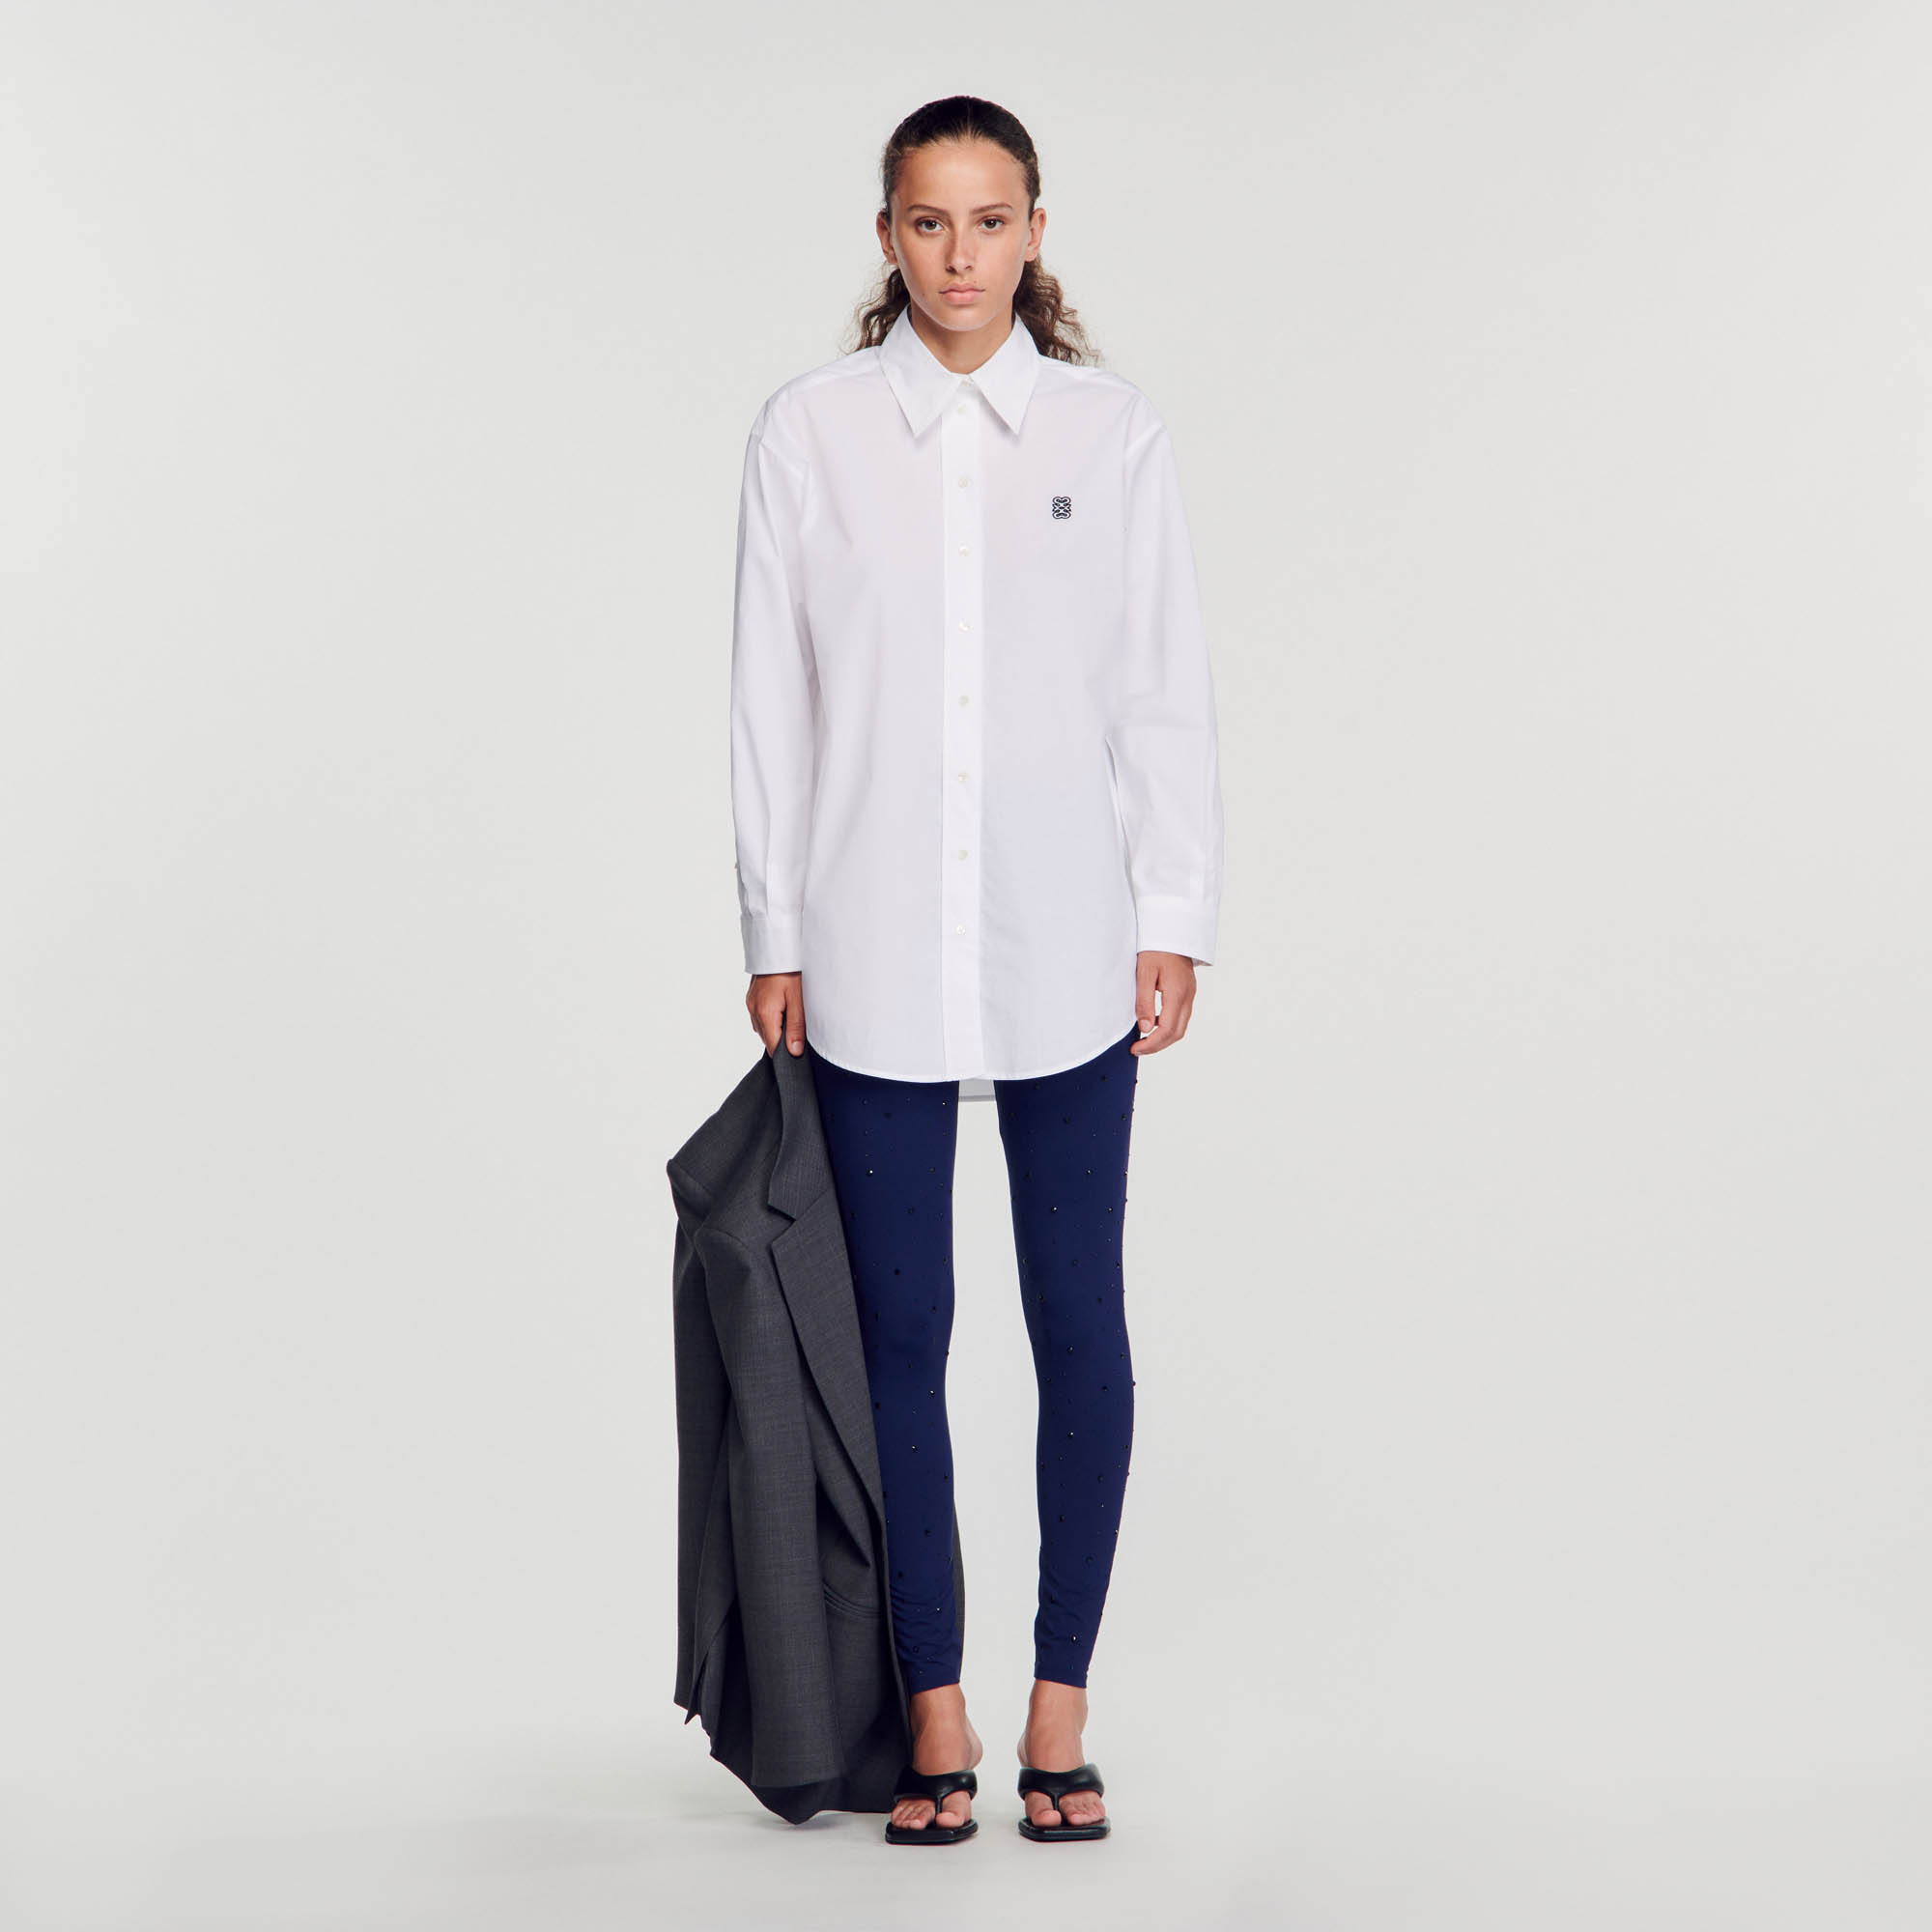 Sandro cotton Buttons: Oversized cotton shirt with a collar, long sleeves, and a button fastening, decorated with a contrasting double S logo embroidered on the chest